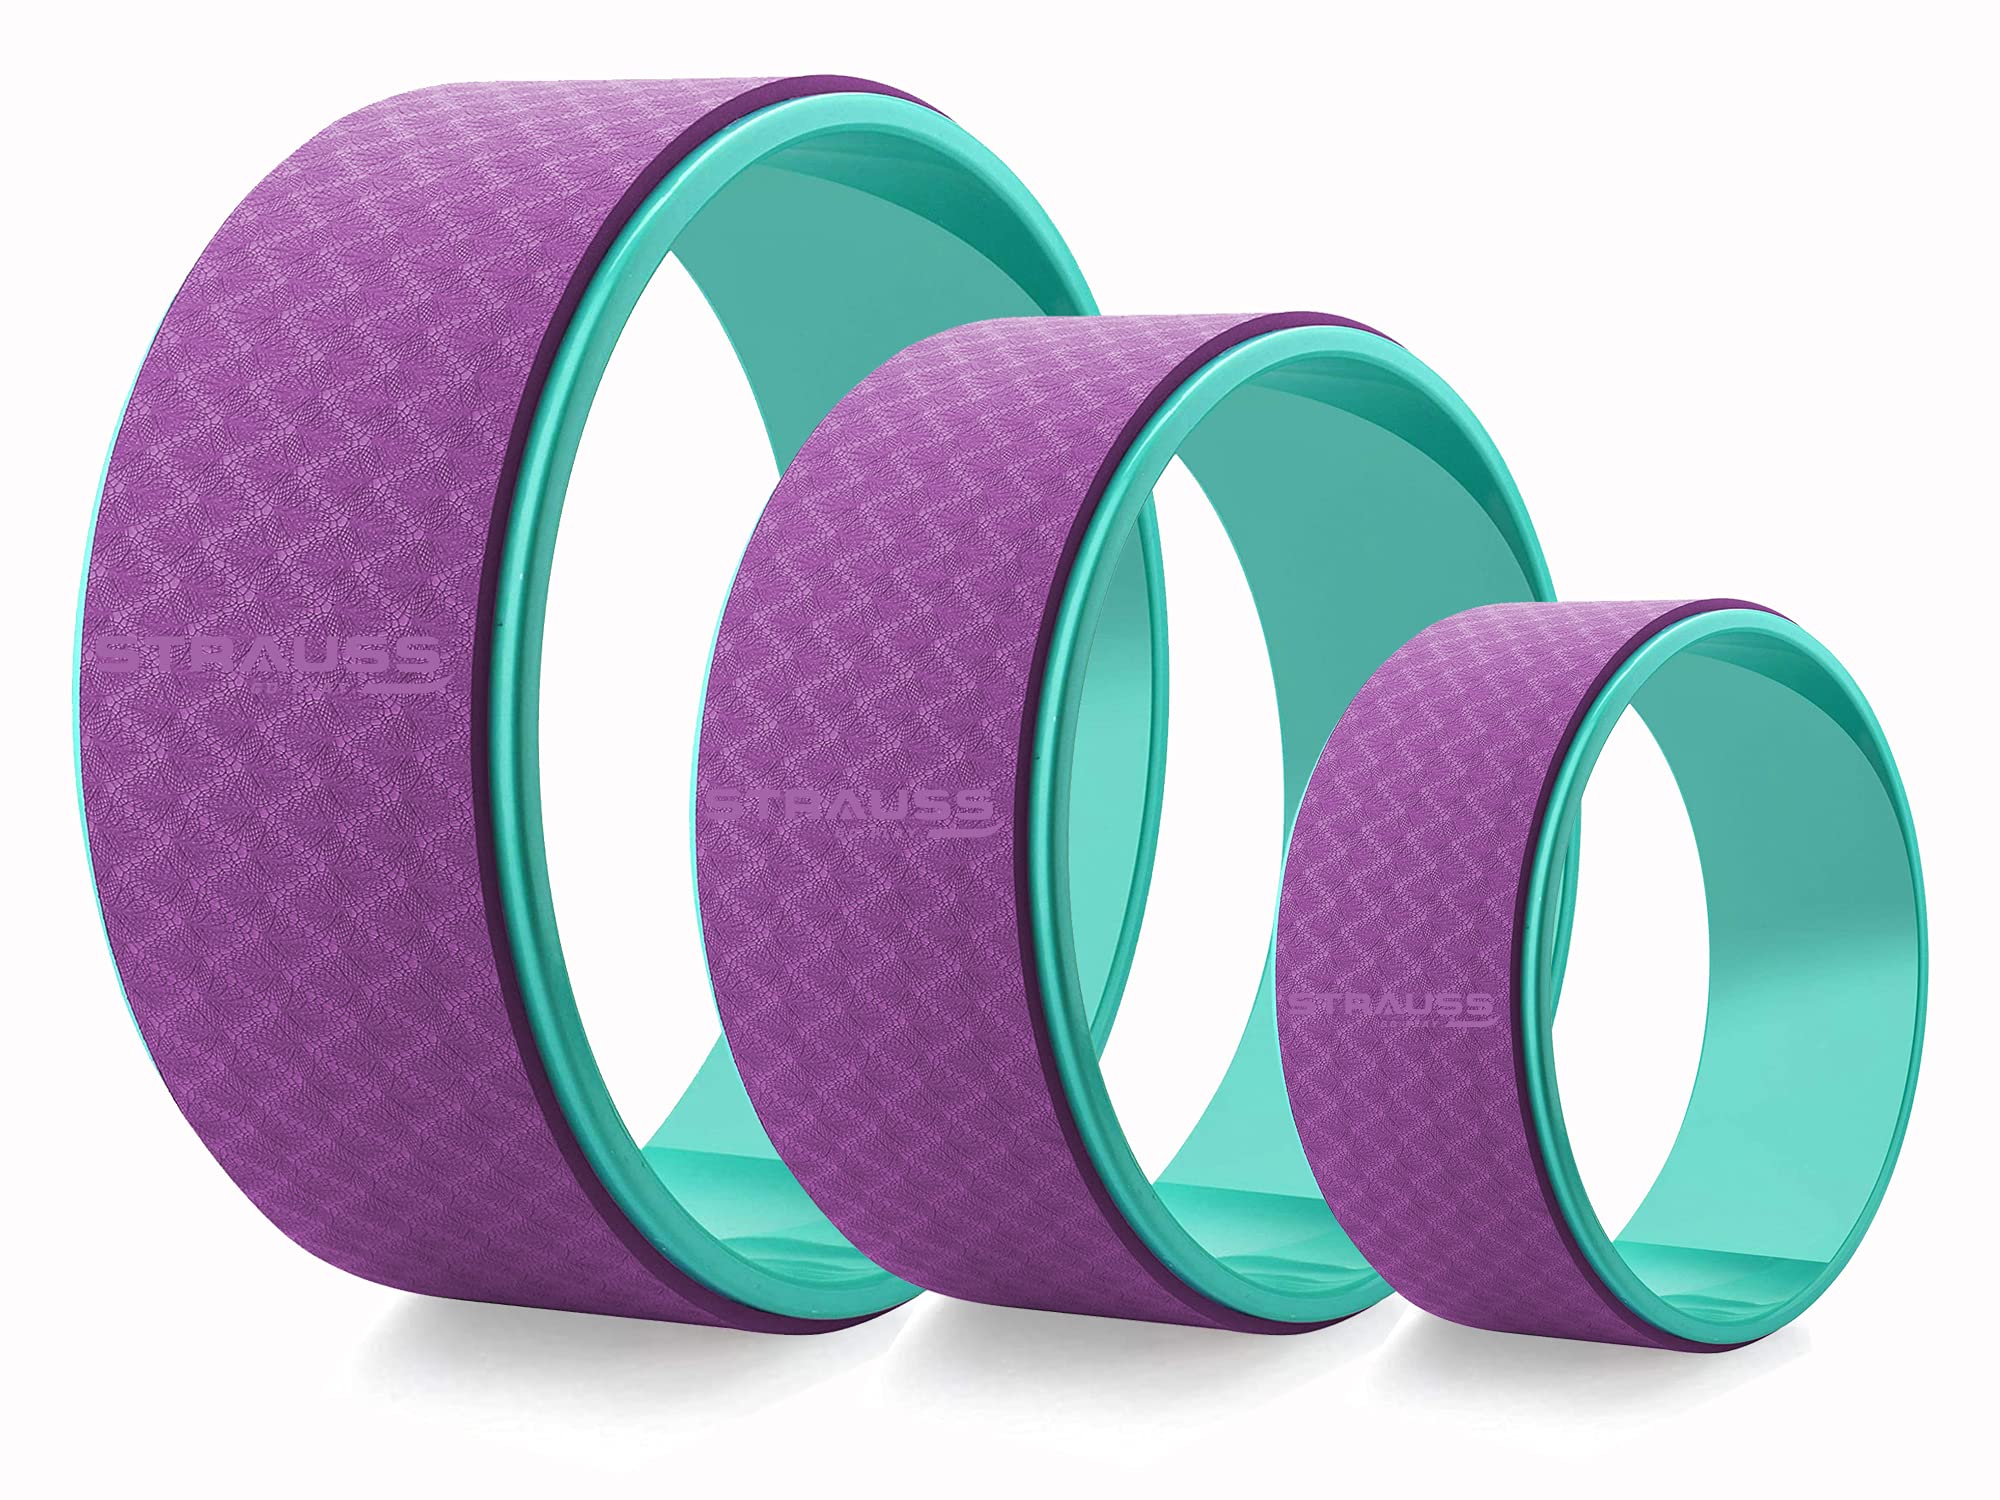 Strauss Yoga Wheel | Ideal for Stretching, Backbends, Exercise, Deep Tissue Massage & Back Pain Relief | Dharma Yoga Prop Wheel with Ultimate Comfort  | Set Of 3, (Purple)